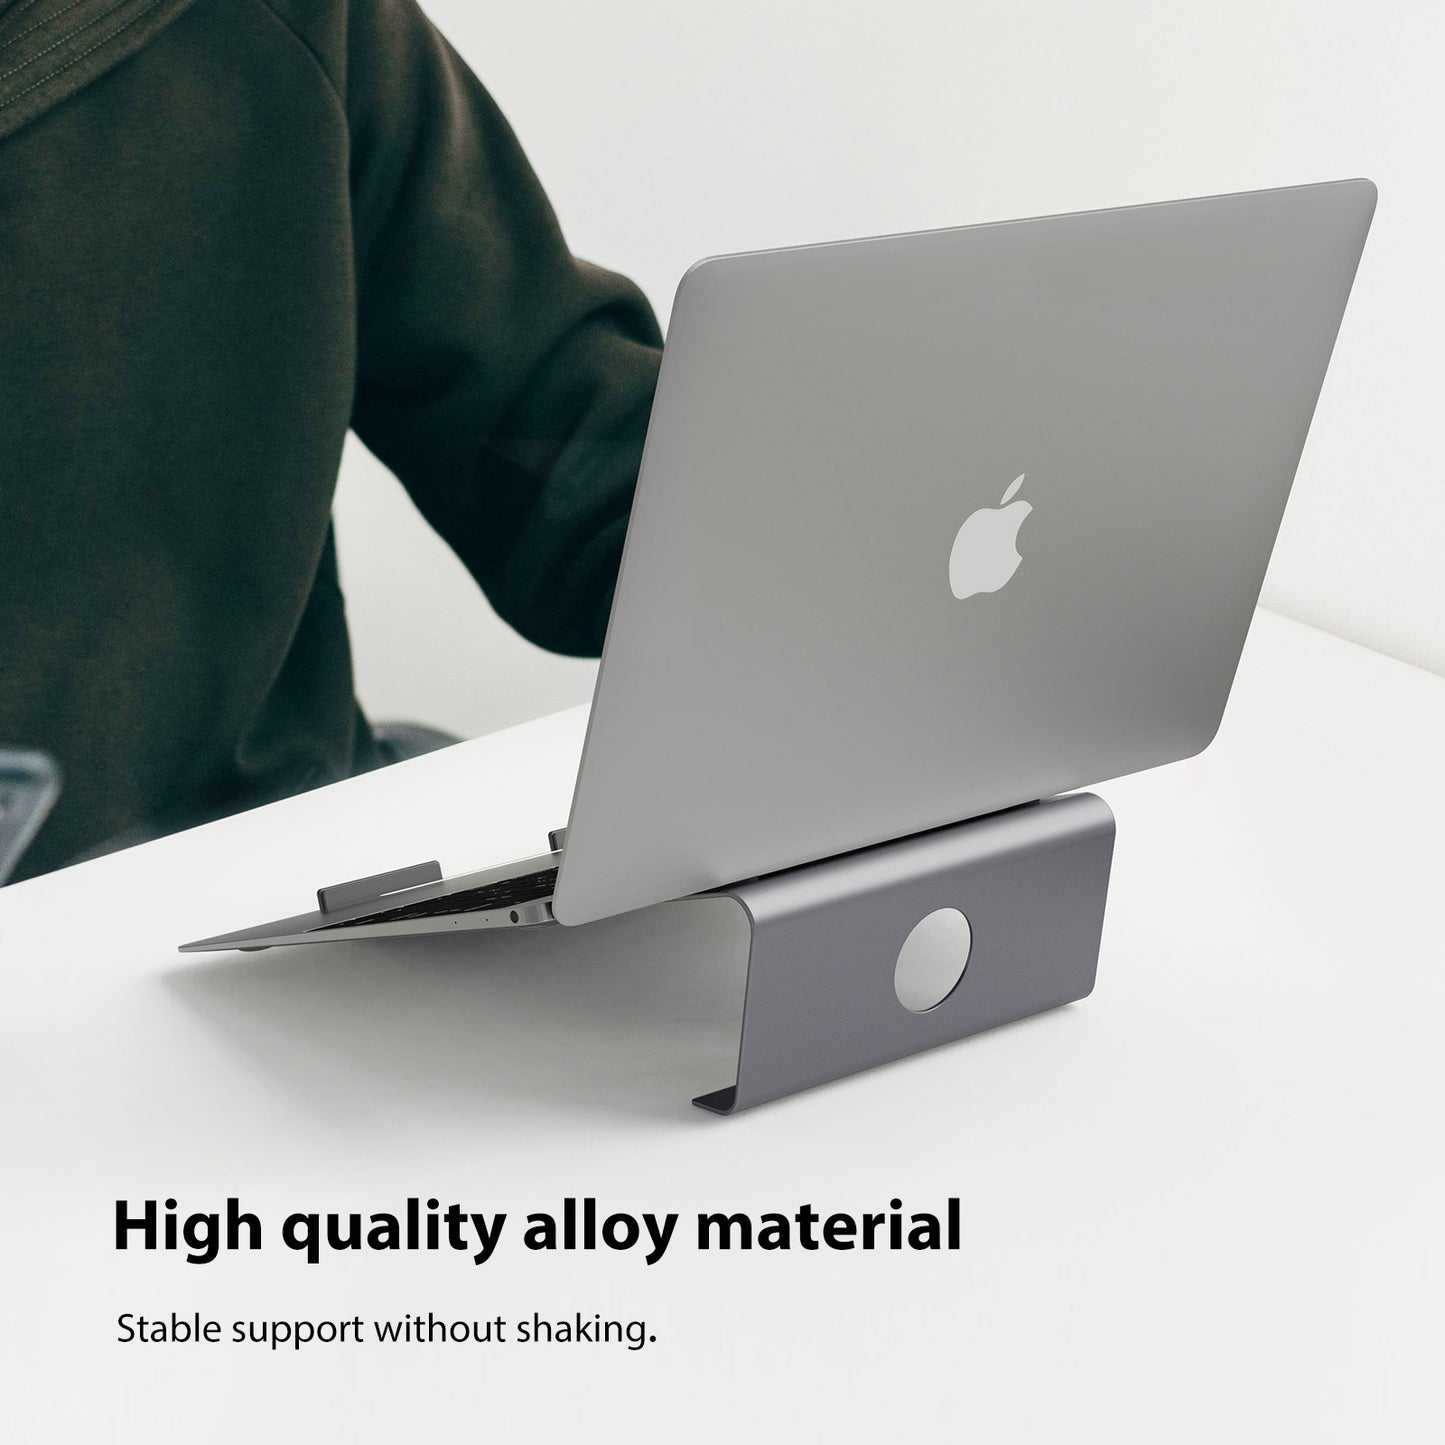 Laptop Stand，Aluminium Laptop Riser，Ergonomic Laptop Holder Compatible With Macbook Dell More 10-17 Inch Laptops Work From Home Or Office(LS-1)